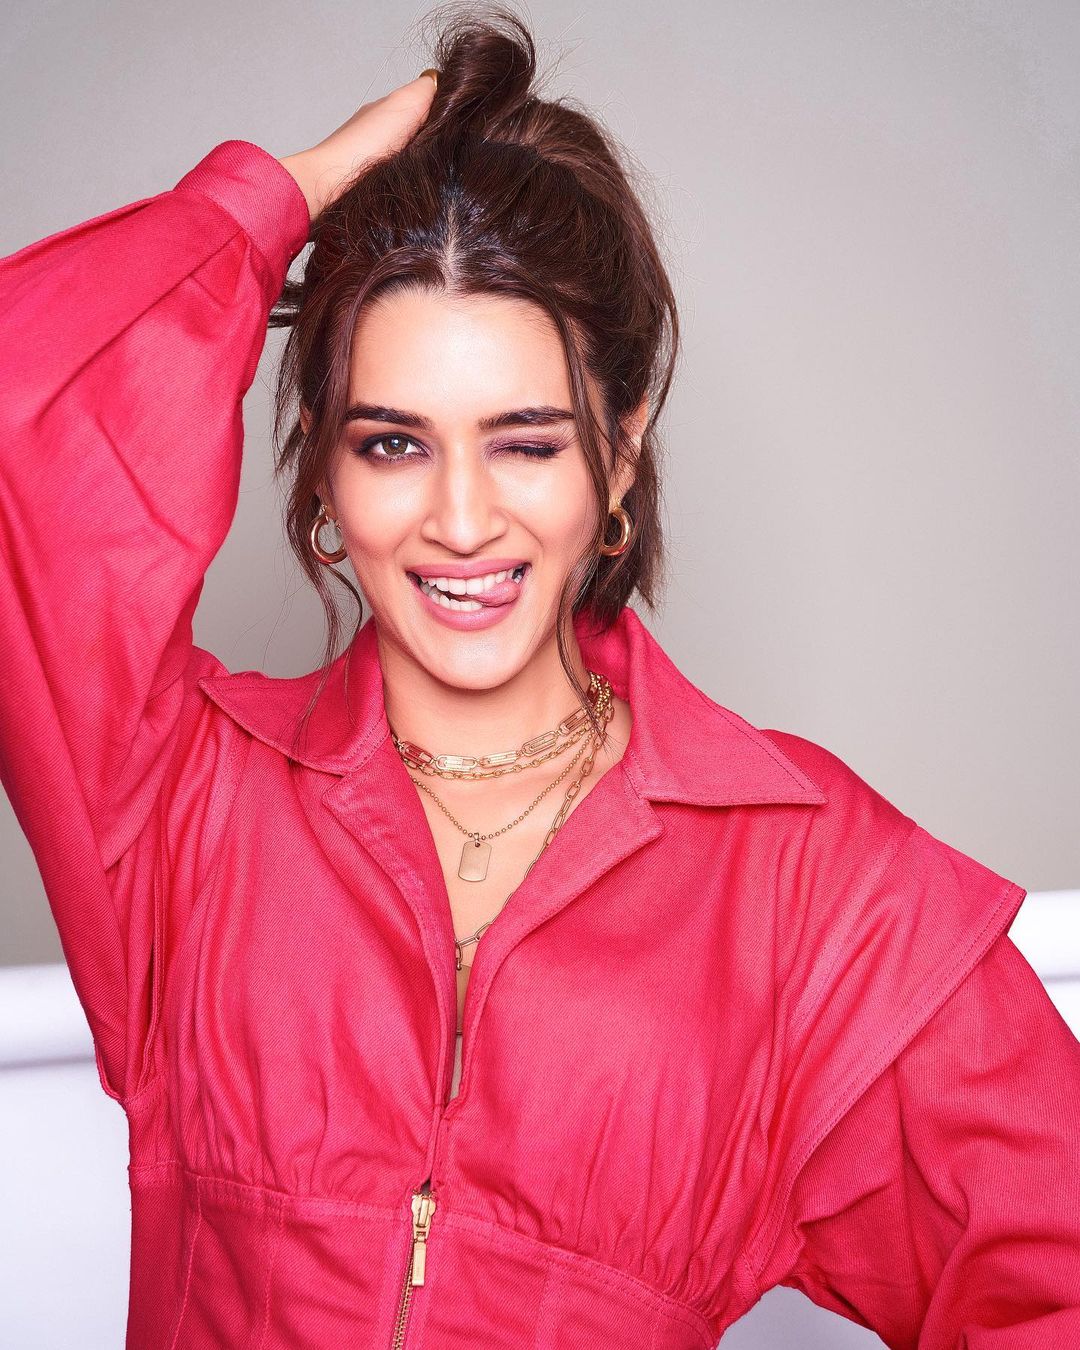 Kriti Sanon looks drop-dead gorgeous with minimal makeup and a quirky hairstyle